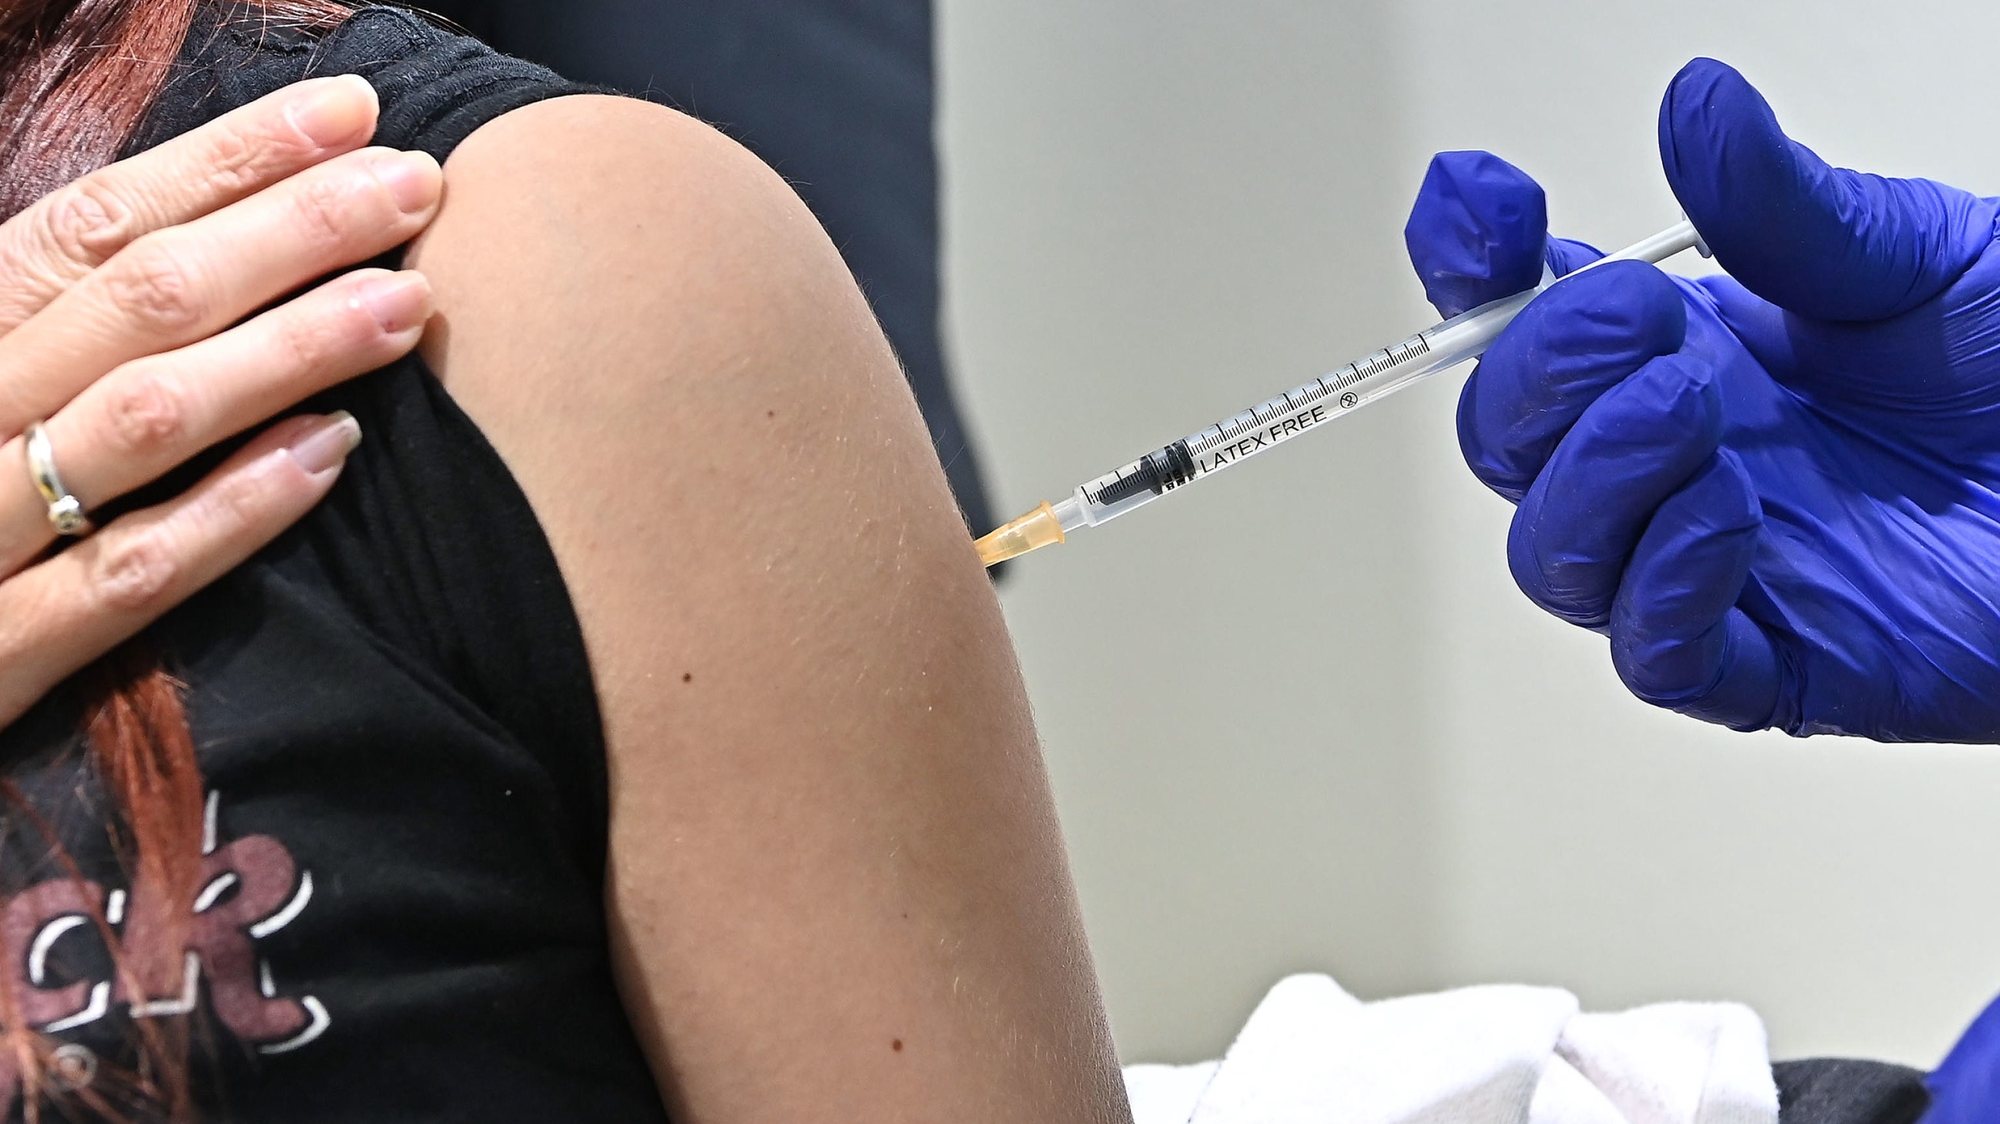 epa09073510 A woman receives a Covid-19 vaccine during the opening of a vaccination centre in a gymnasium of the university sports center in via Artom, amid the Covid-19 Coronavirus pandemic, in Turin, Italy, 14 March 2021. Most of Italy will be a COVID-19 red zone from 15 March 2021 due to a sharp rise in the number of COVID-19 cases.  EPA/Alessandro Di Marco